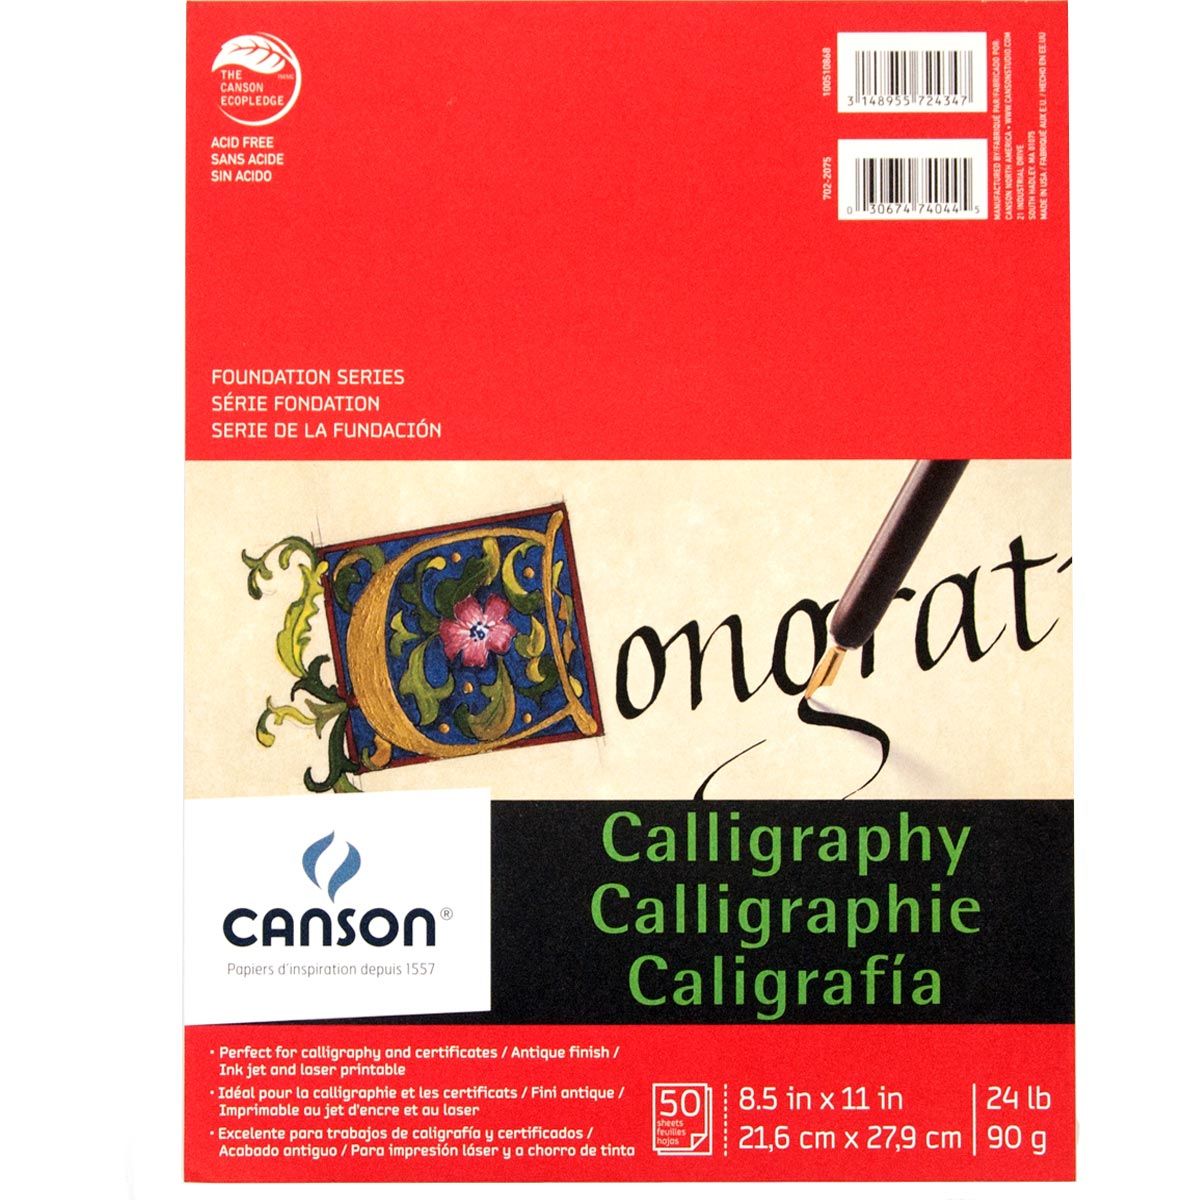 Canson Calligraphy Parchment Paper Pad 8.5